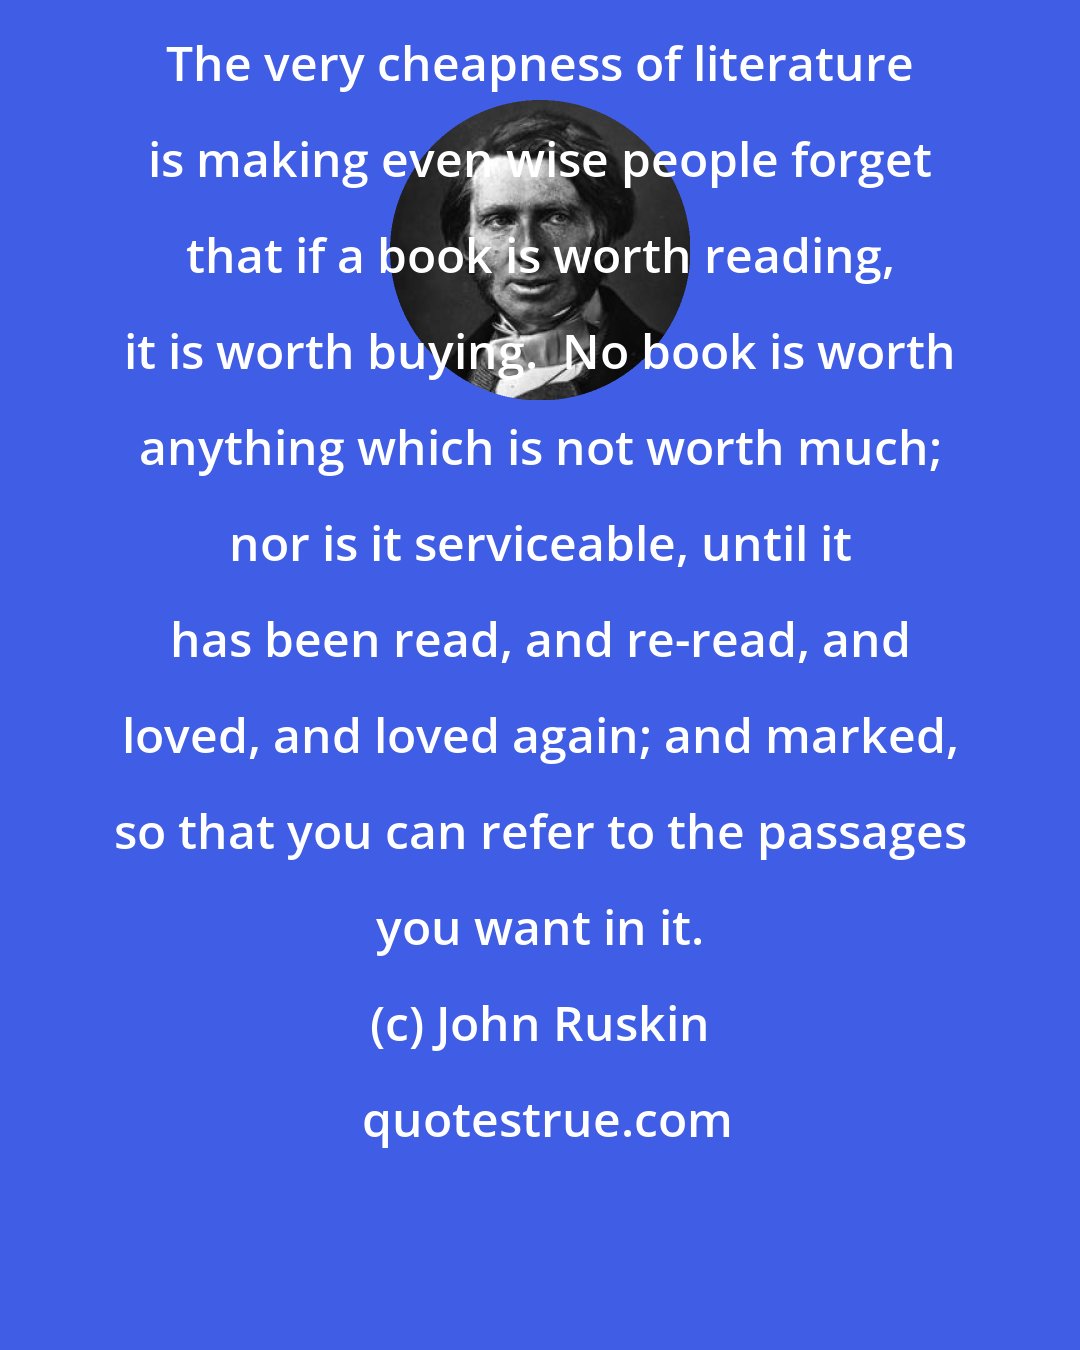 John Ruskin: The very cheapness of literature is making even wise people forget that if a book is worth reading, it is worth buying.  No book is worth anything which is not worth much; nor is it serviceable, until it has been read, and re-read, and loved, and loved again; and marked, so that you can refer to the passages you want in it.